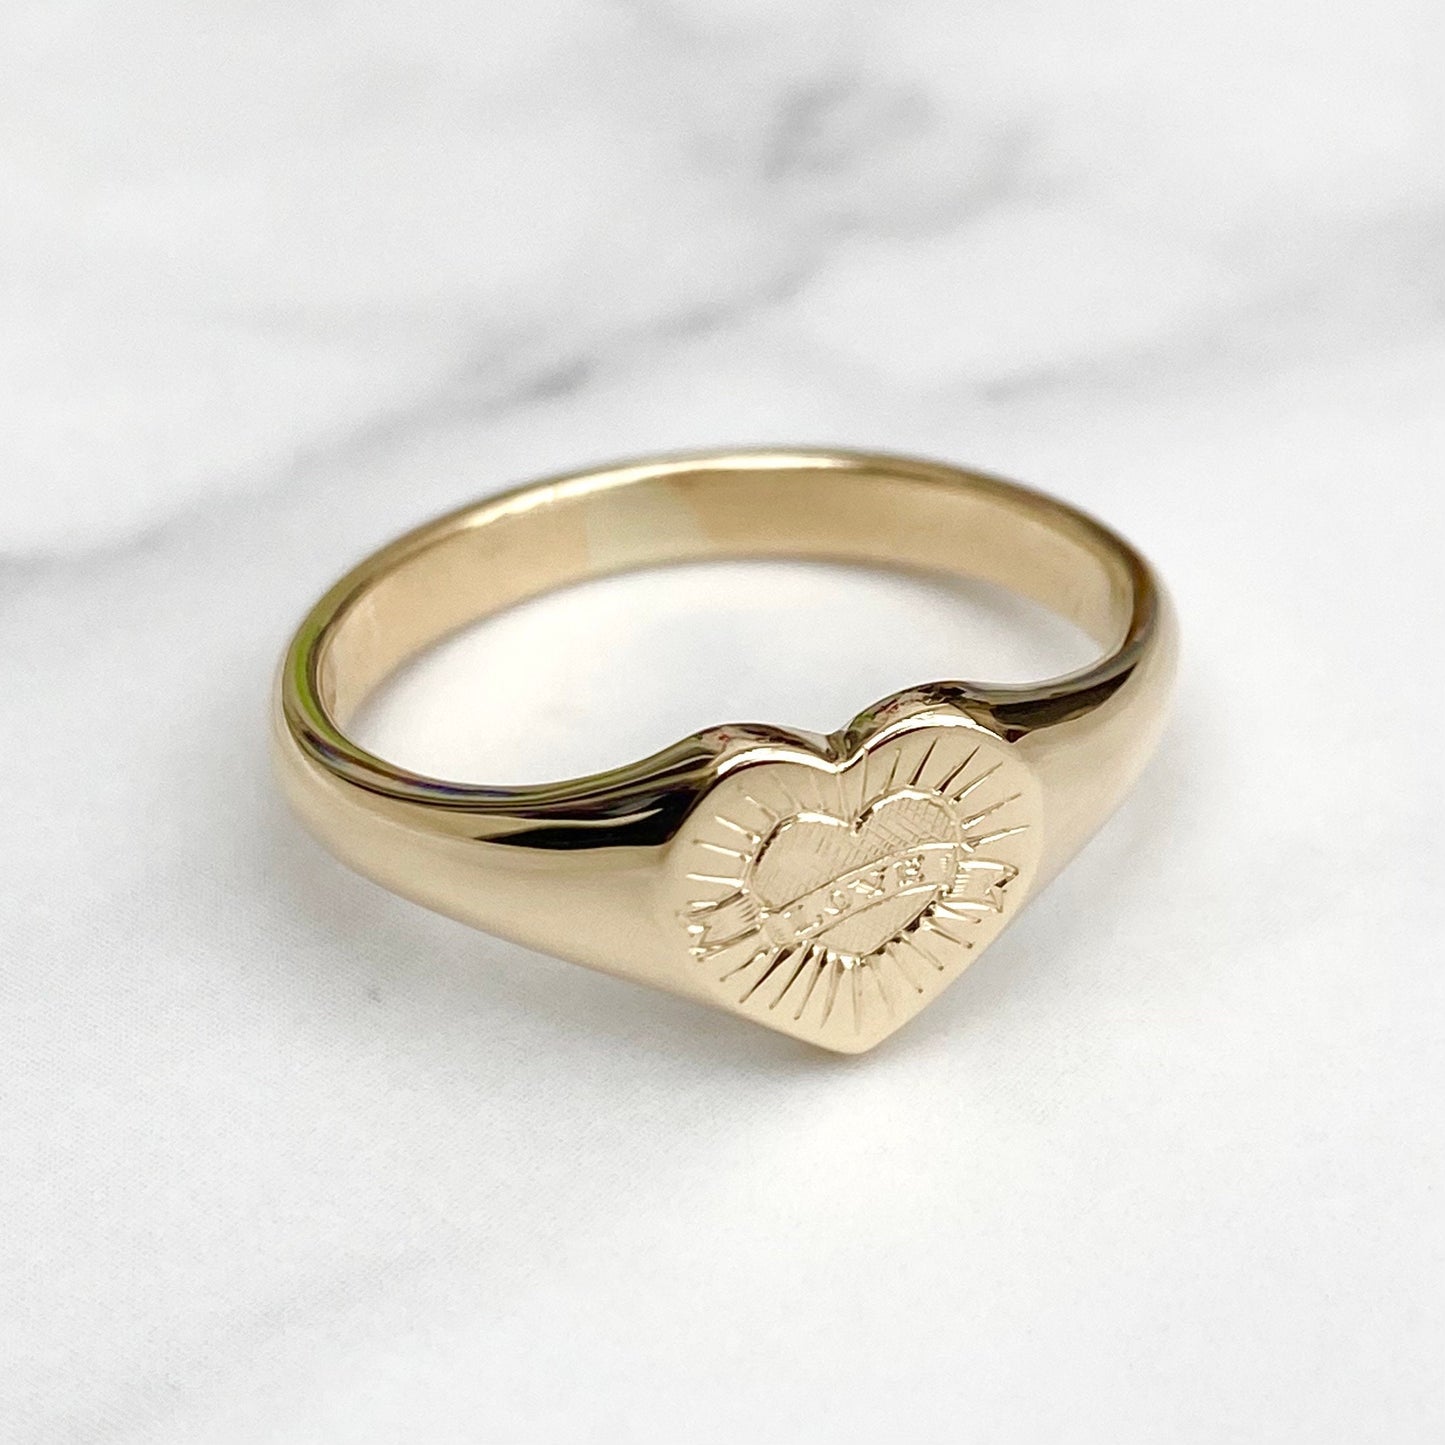 Handmade to order - Ladies 9ct yellow gold engraved love heart signet ring